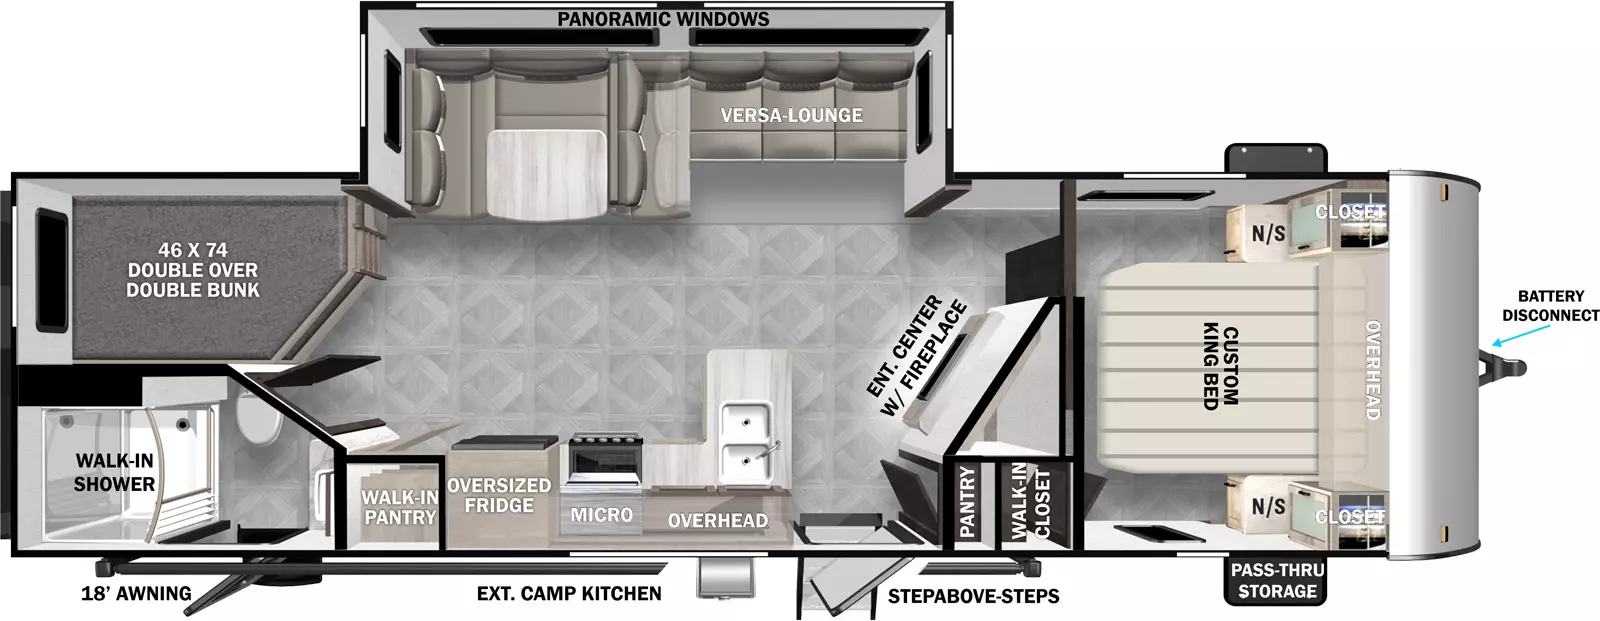 The 26DBUD has two entries and one slideout. Exterior features front pass-through storage, battery disconnect, exterior camp kitchen, StepAbove main entry steps, and 18 foot awning. Interior layout front to back: custom king bed with overhead cabinet and closet with night stand on each side, and walk-in closet; angled entertainment center with fireplace along inner wall with pantry and entry door; off-door side slideout with versa lounge dinette and panoramic windows; peninsula kitchen counter with sink wraps to door side with overhead cabinet, microwave, cooktop, oversized refrigerator, and walk-in pantry; rear off-door side double over double bunk beds; rear door side full bathroom with walk-in shower and second entry.